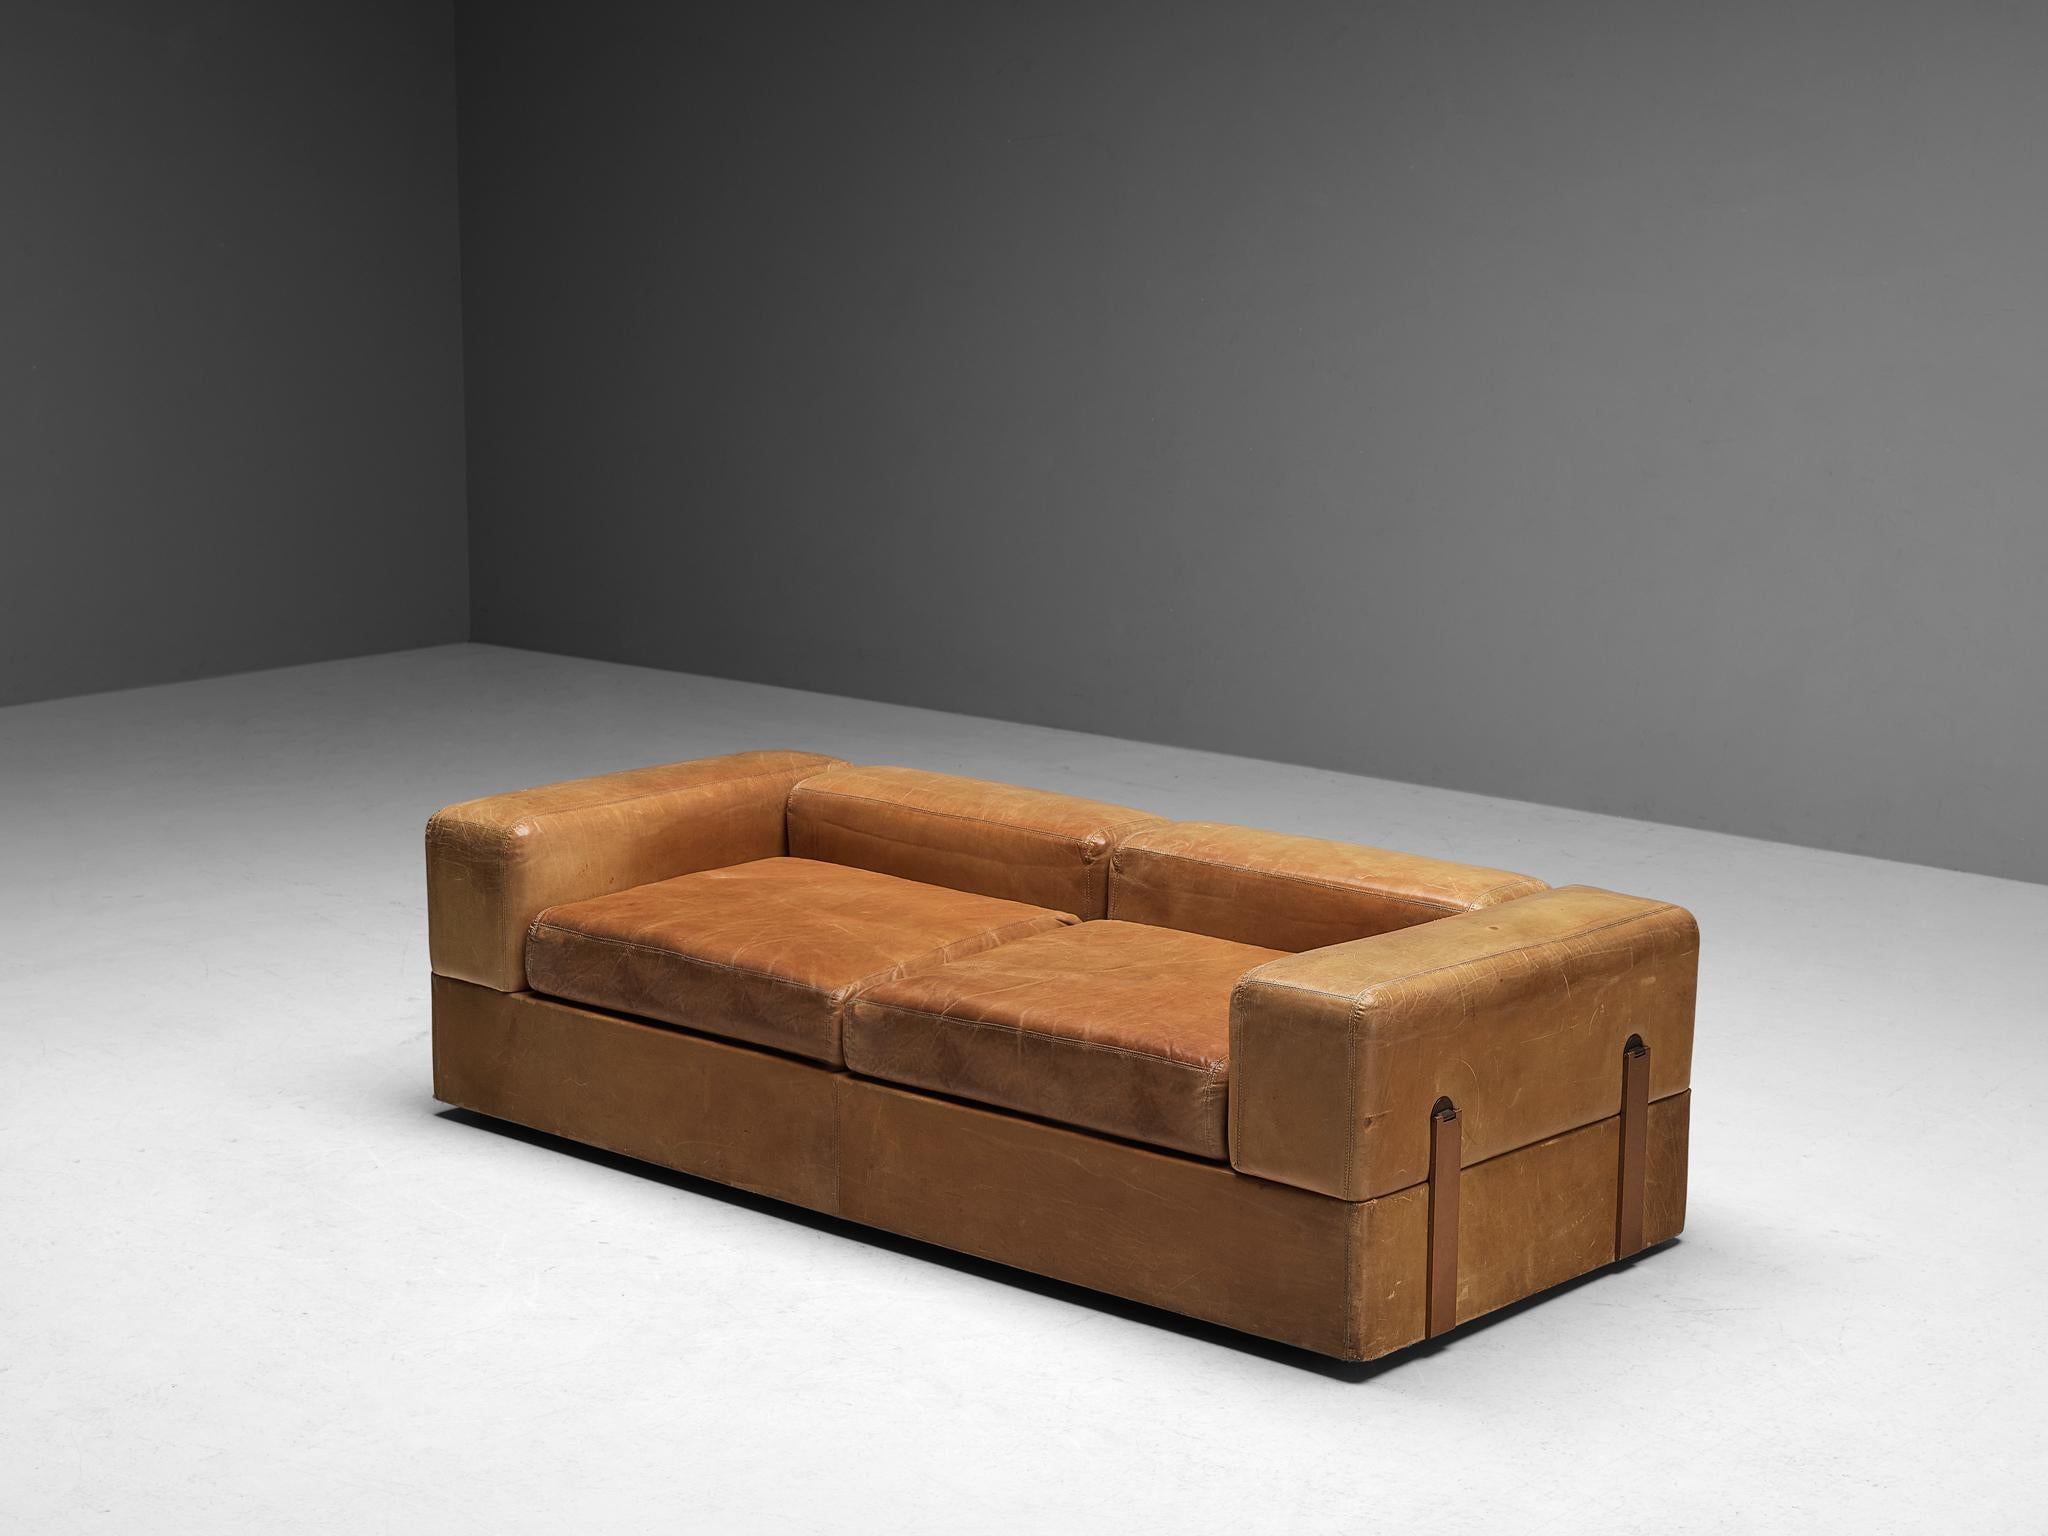 Tito Agnoli for Cinova, sofa or daybed model 711, leather, laminated wood, brass, Italy, 1968

Cubic sofa that can be transformed into a daybed by Italian designer Tito Agnoli for Cinova. The brass frame displays an exquisite composition of vertical